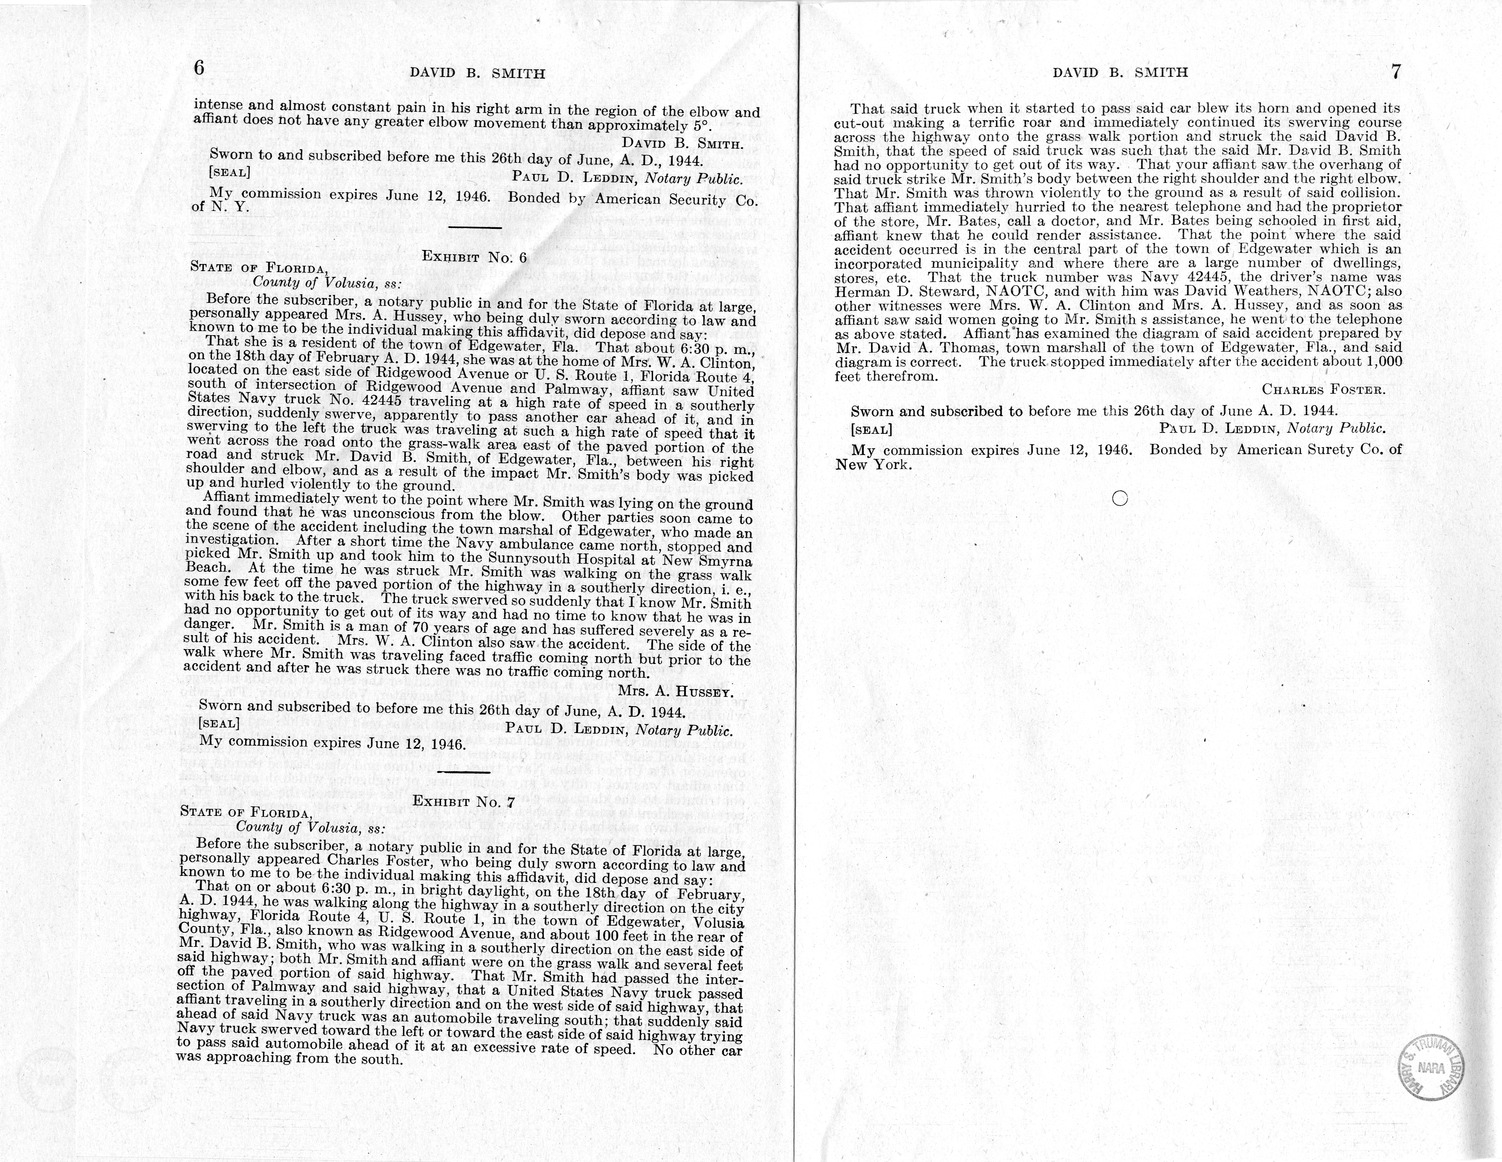 Memorandum from Frederick J. Bailey to M. C. Latta, H.R. 209, For the Relief of David B. Smith, with Attachments